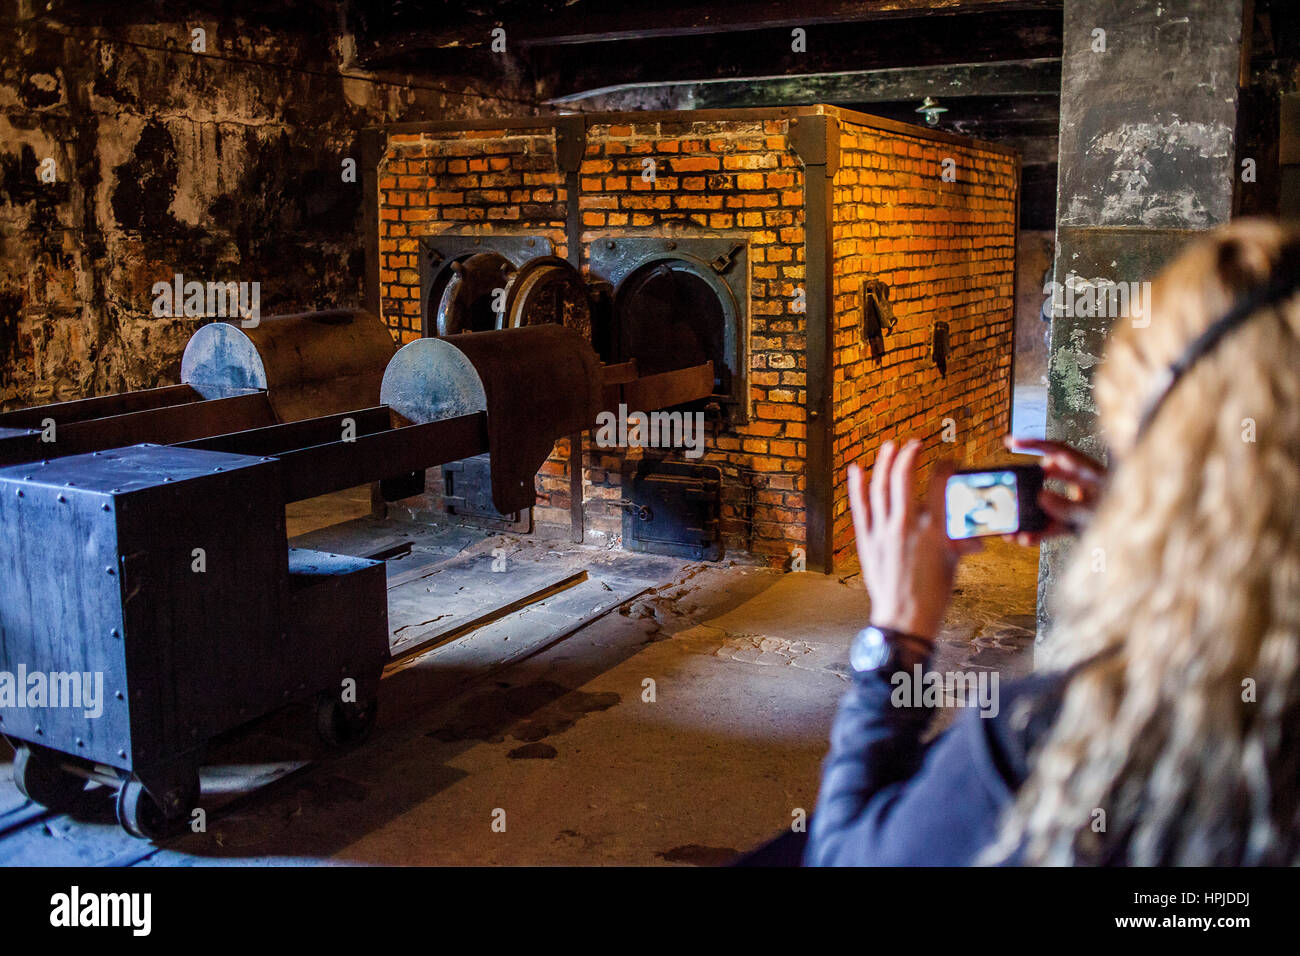 Oven for incineration dead bodies, in concentration camp. Auschwitz. Poland. Stock Photo